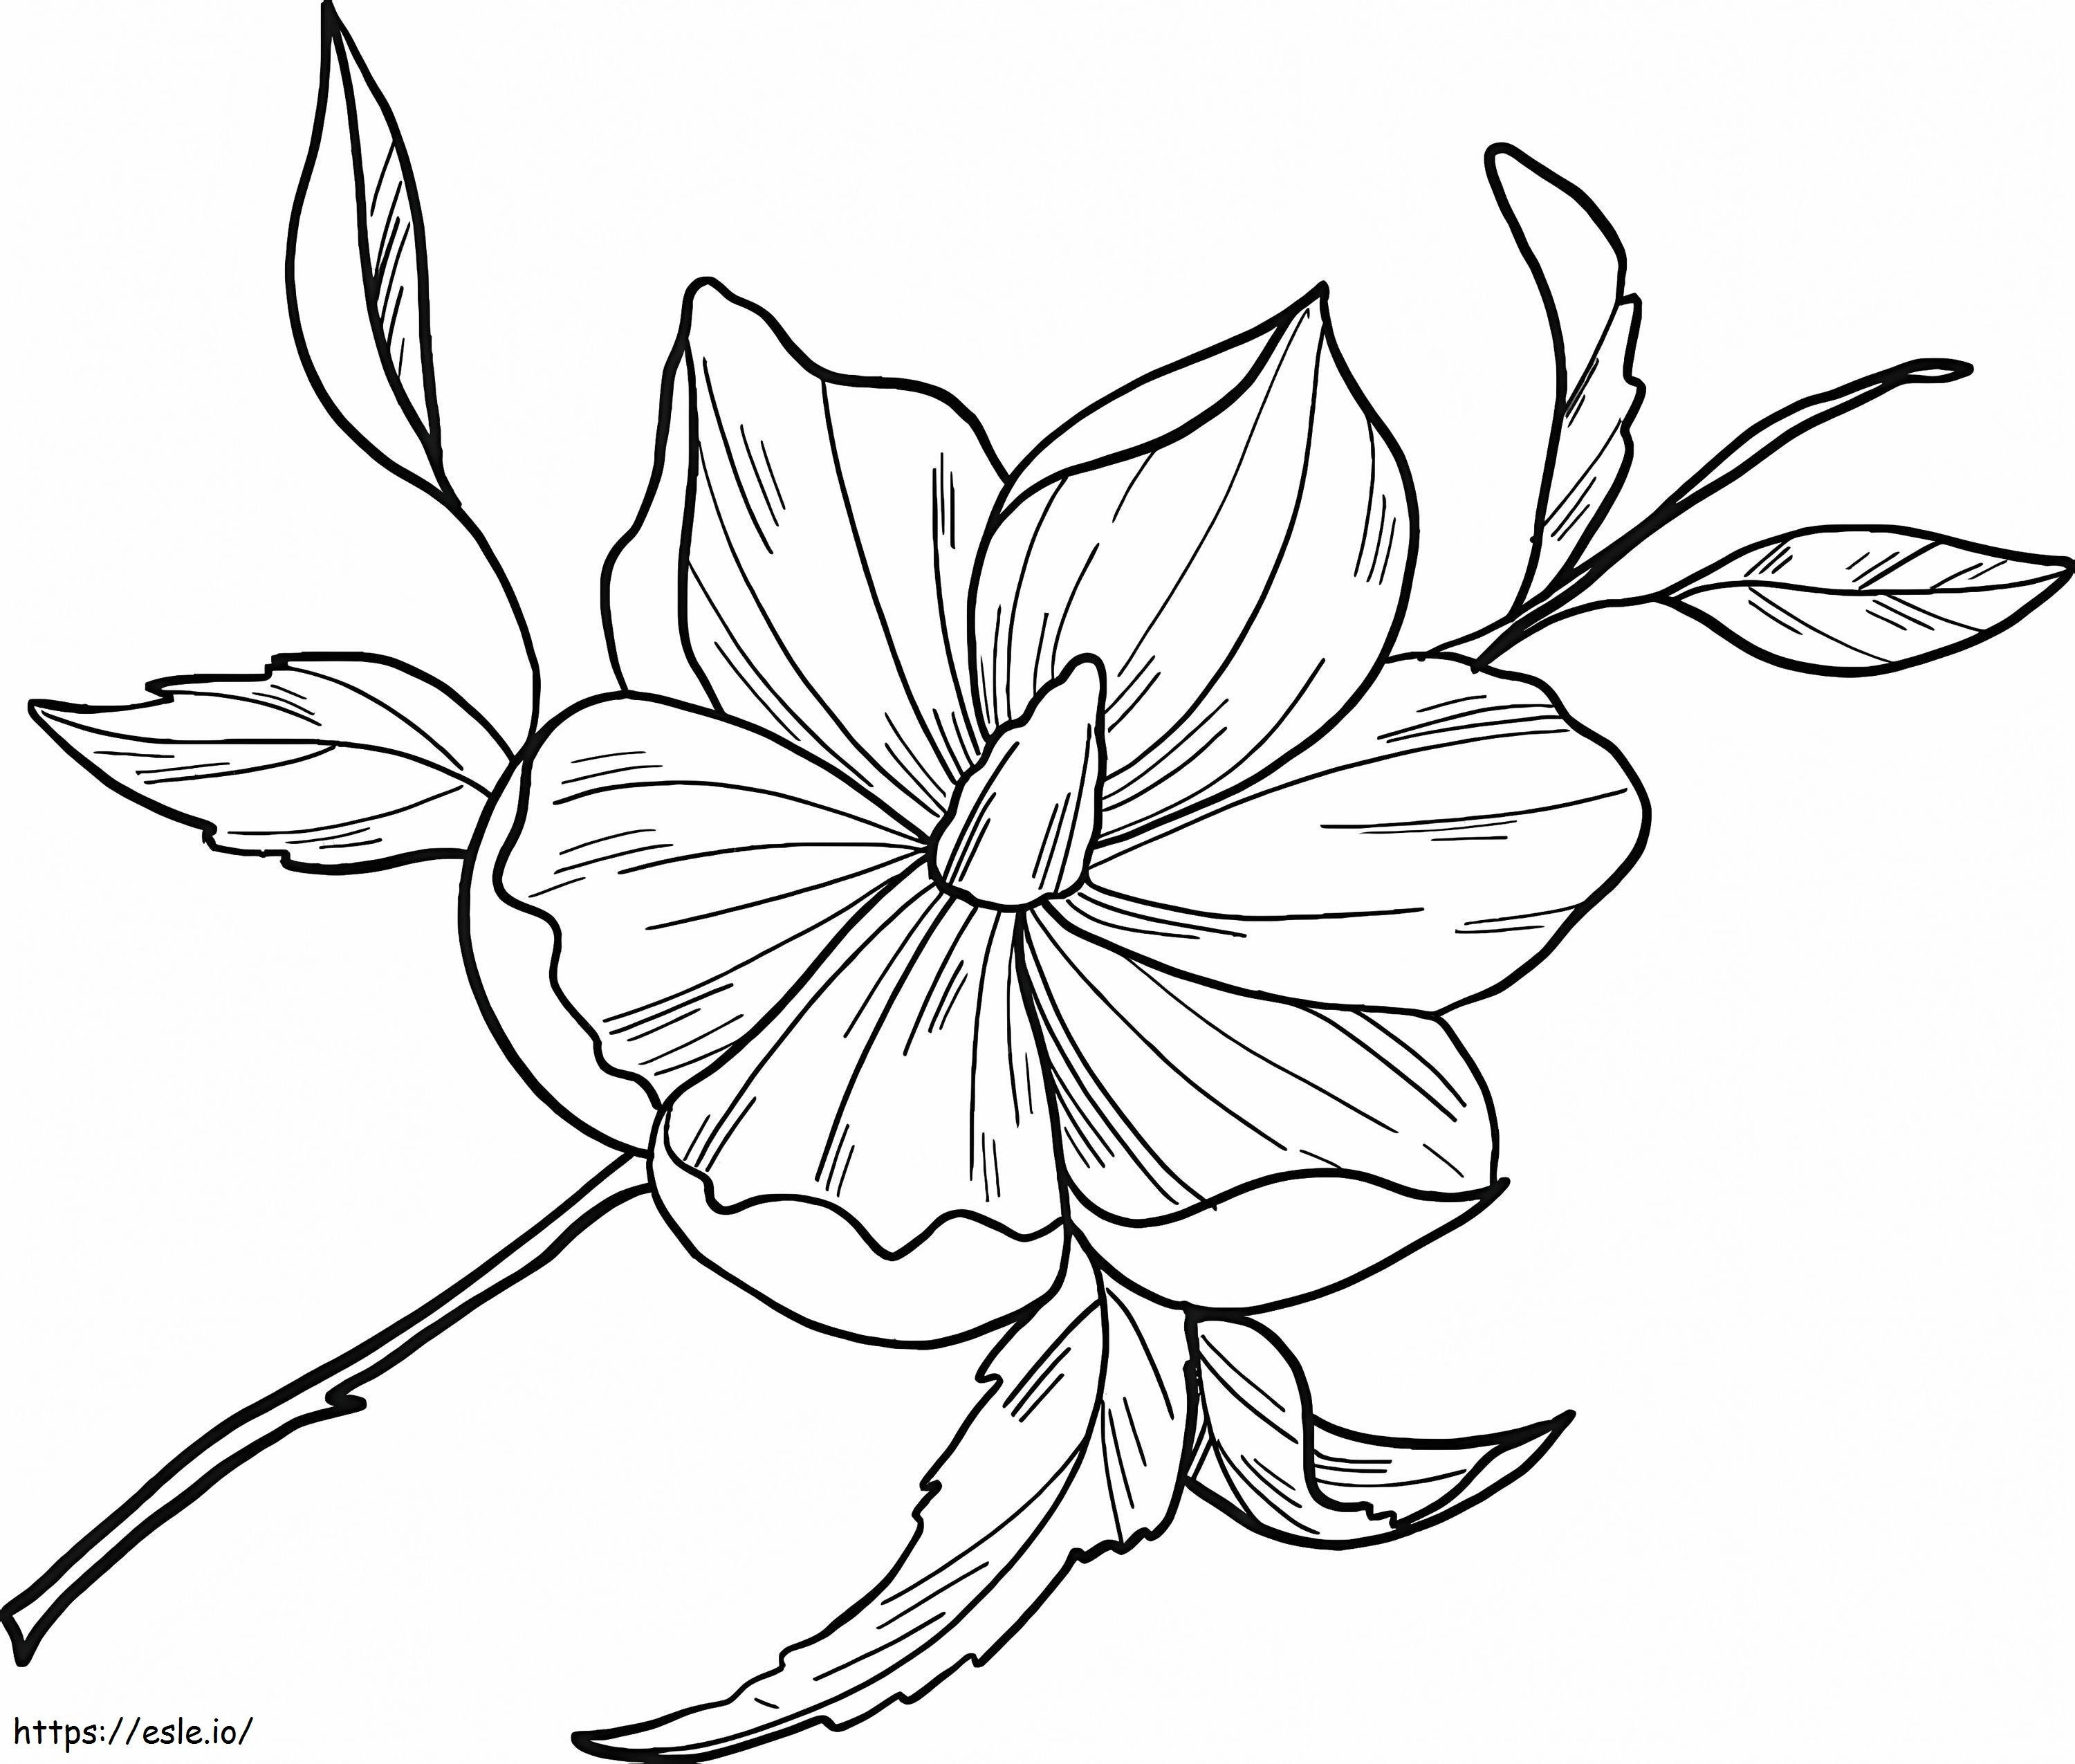 Magnolia Flower 11 coloring page